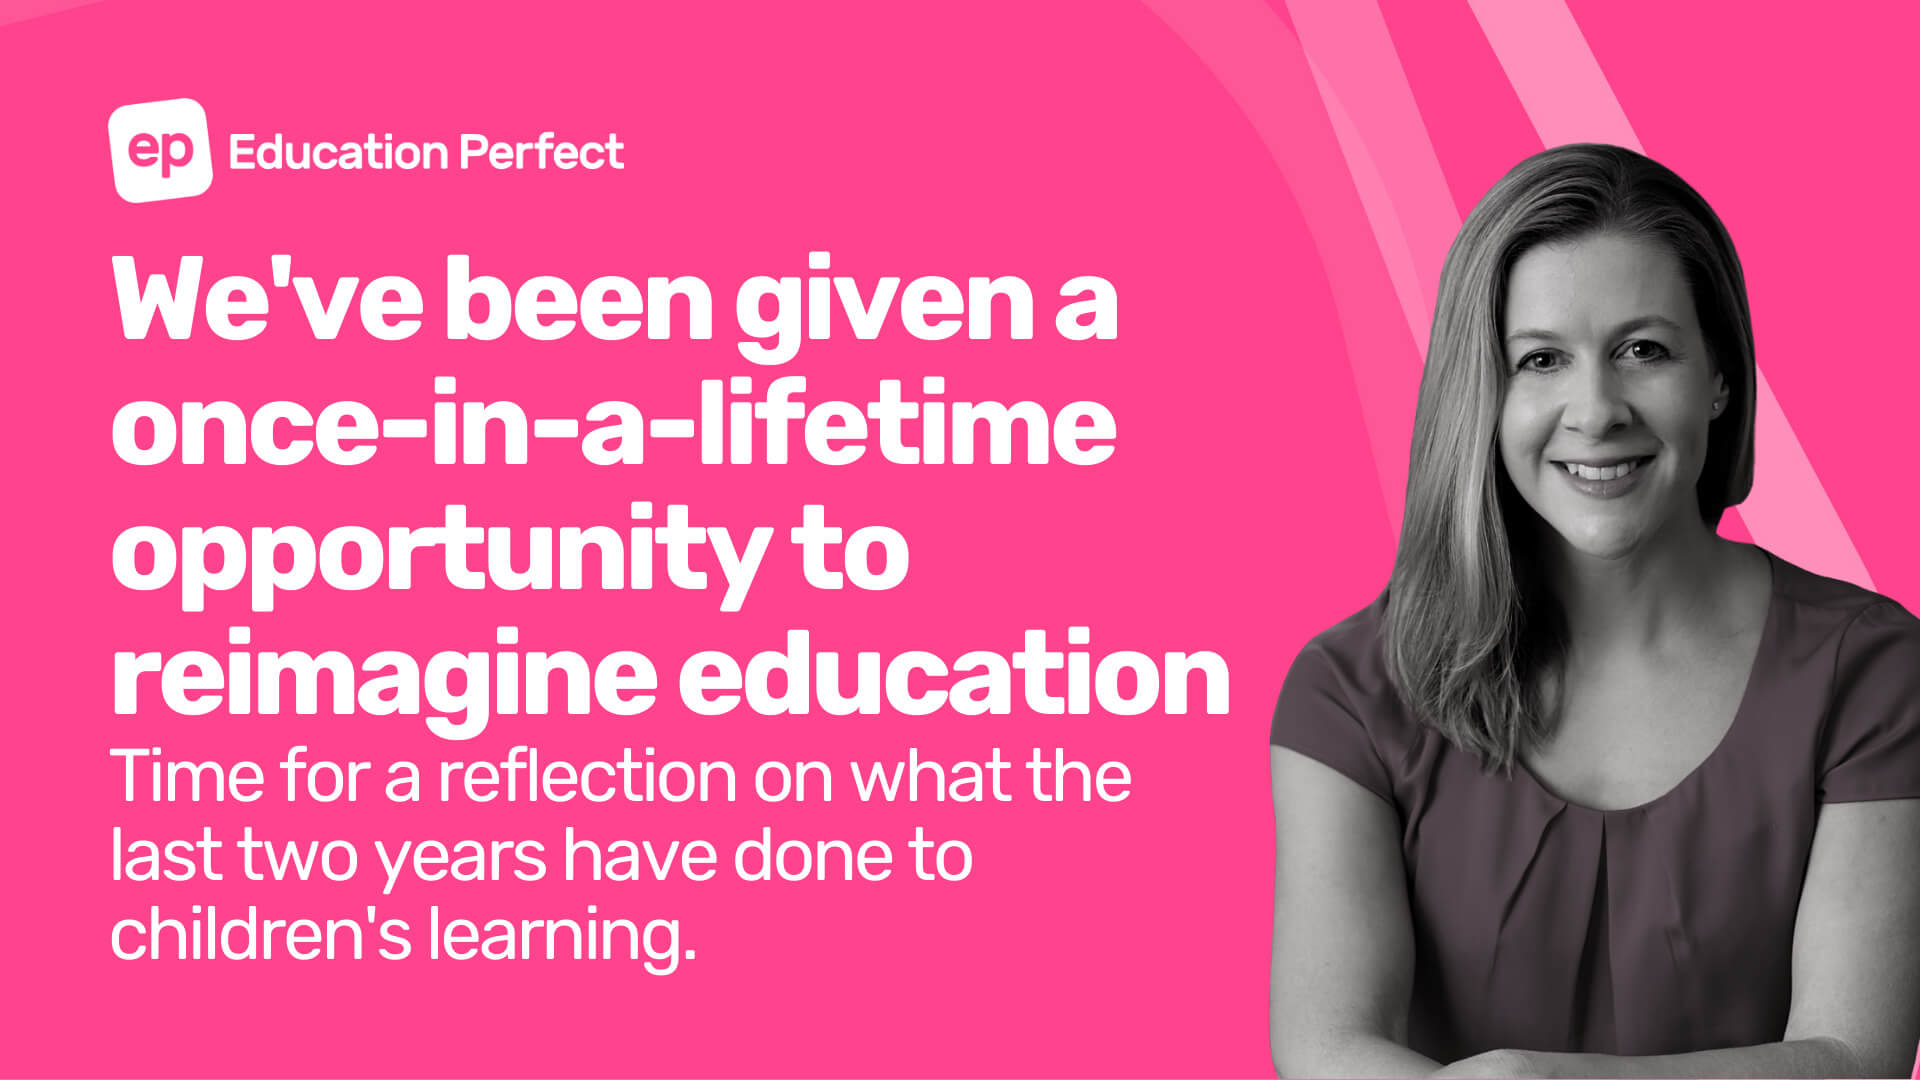 We’ve been given a once-in-a-lifetime opportunity to reimagine education